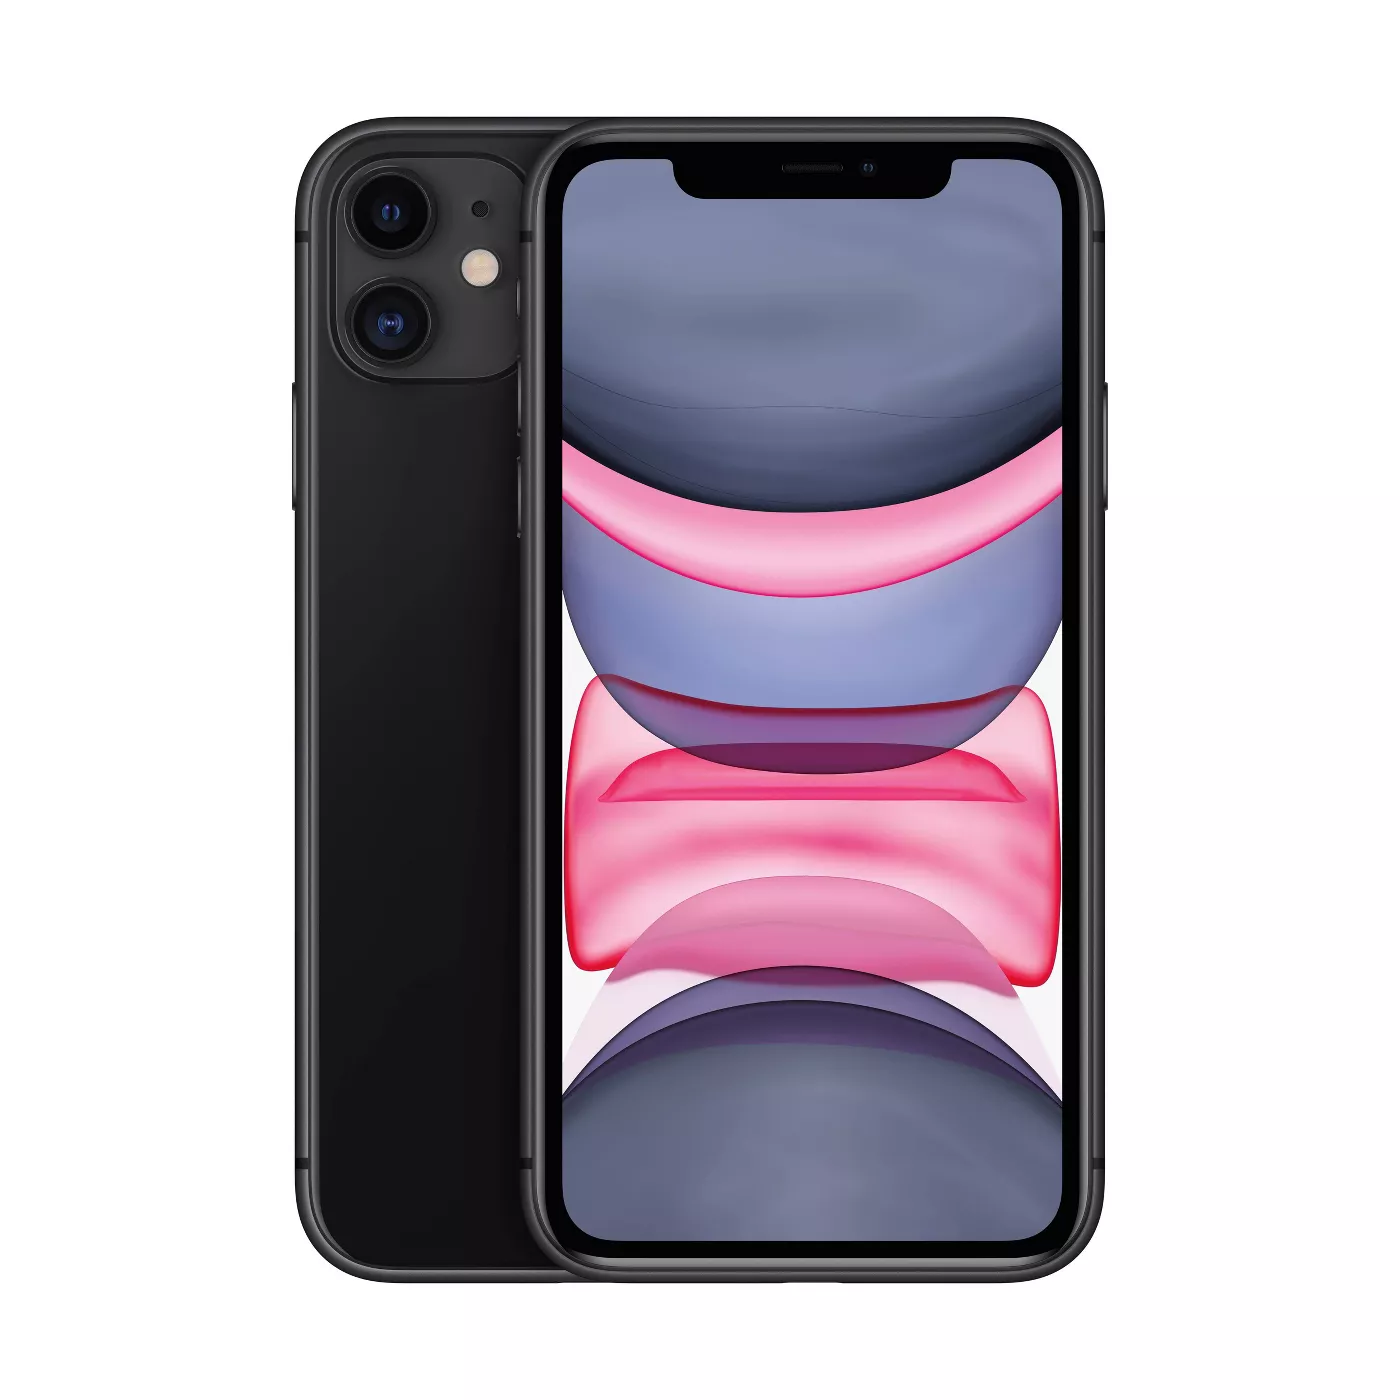 Apple iPhone 11 - image 1 of 5